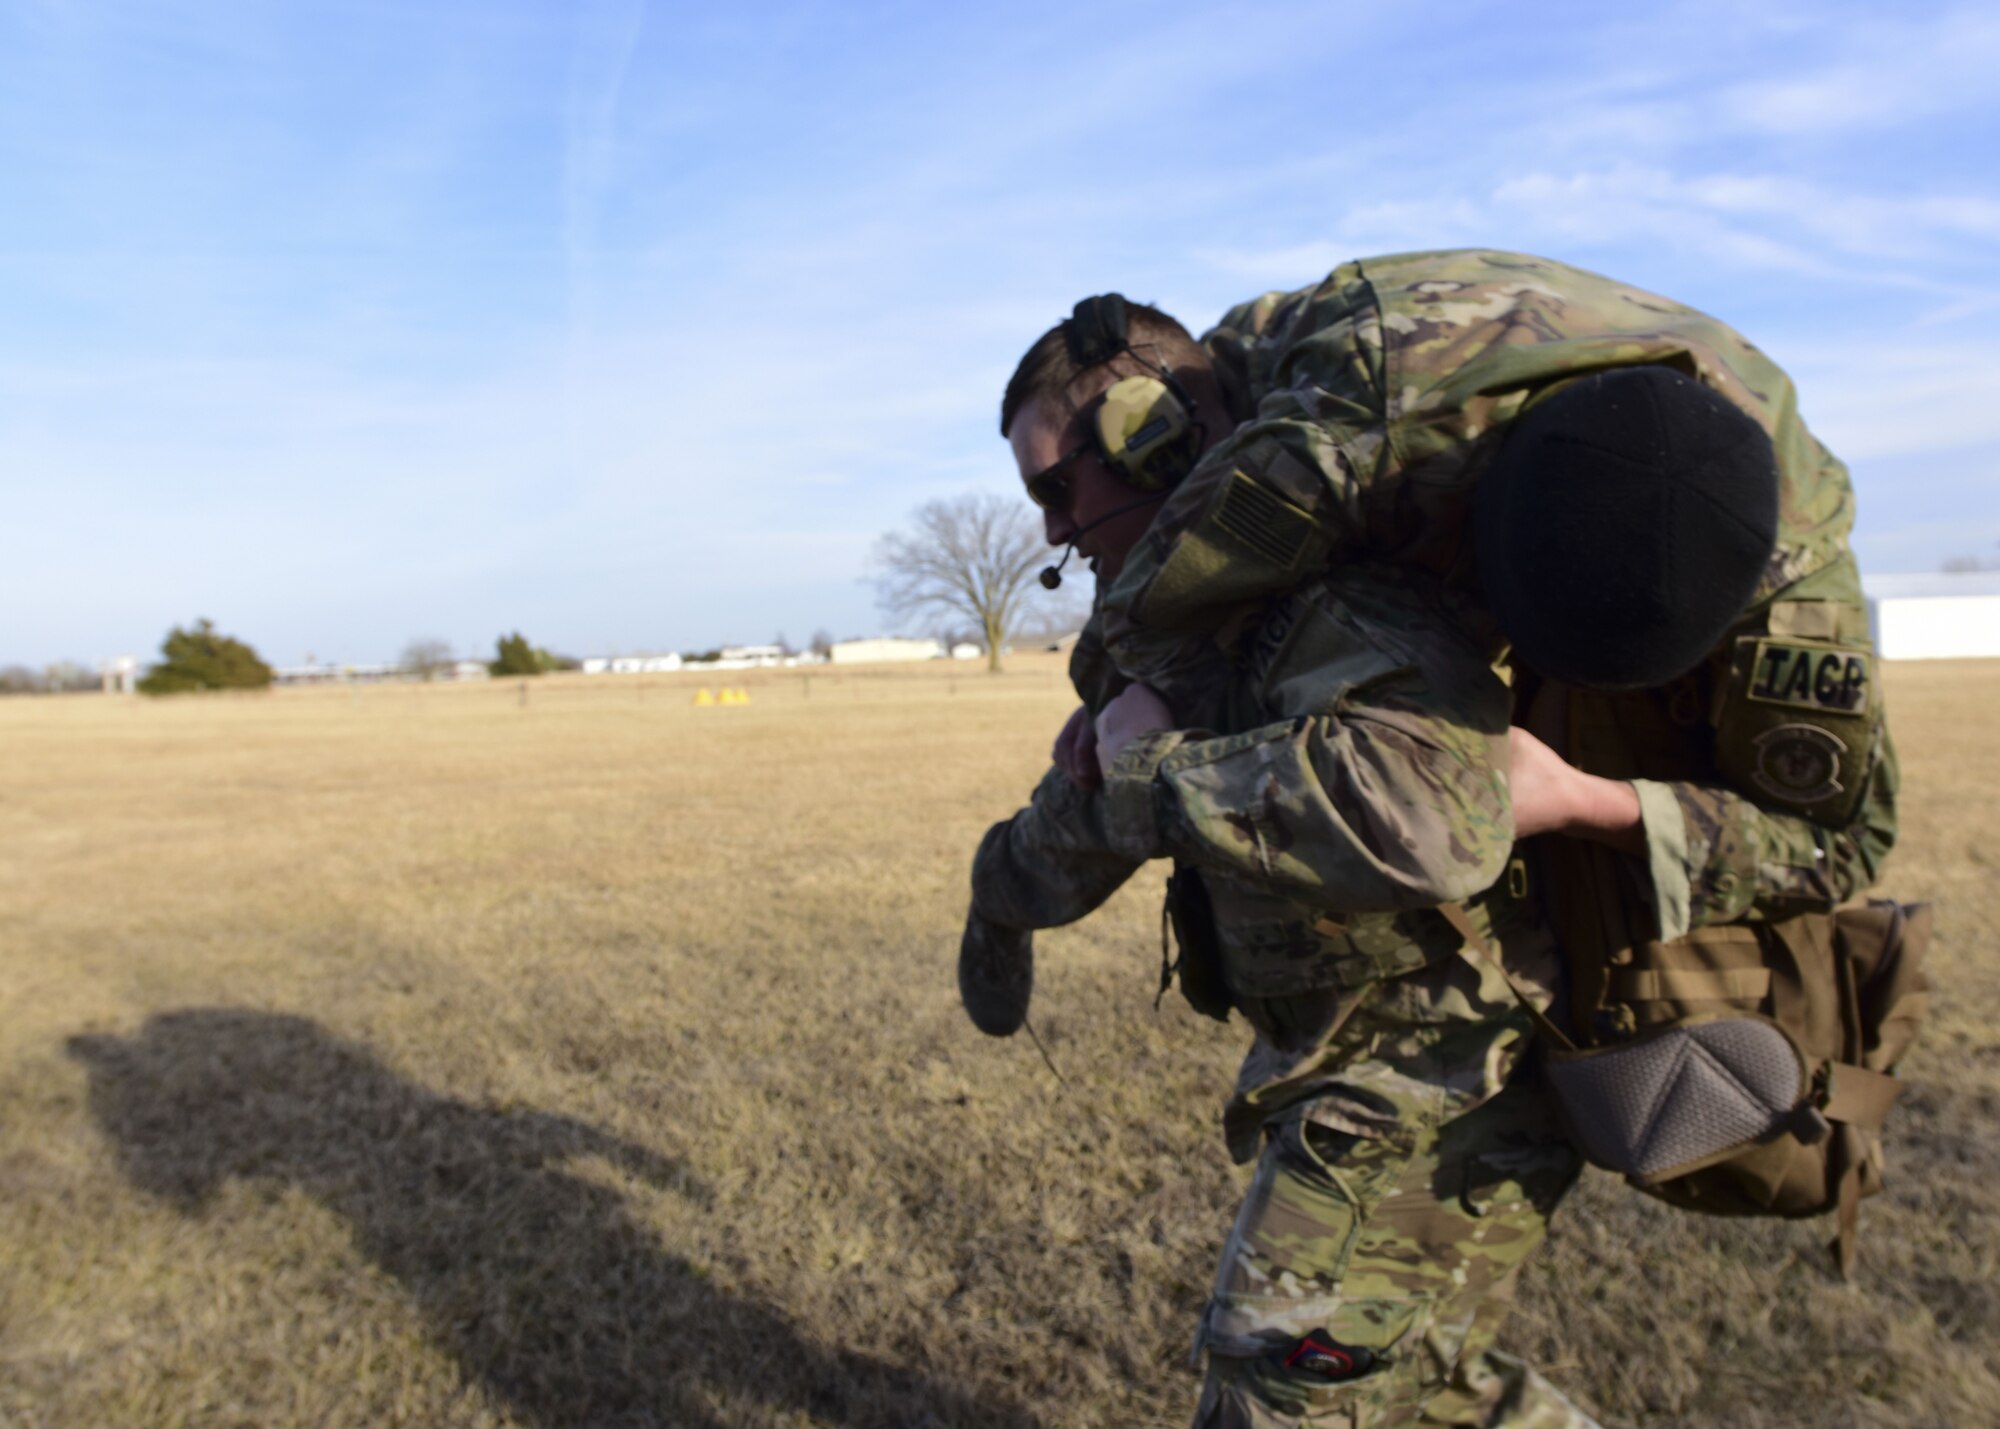 A Joint Terminal Attack Controller assigned to the 7th Air Support Operations Squadron, located in Fort Bliss, Texas, carries a team member during a joint training mission at Warsaw, Mo., Jan. 31, 2018. This training allowed units from Whiteman Air Force Base, Mo., work together with members from the 7th ASOS to standardize how JTACs are integrated into a multi-domain fight. (U.S. Air Force by Staff Sgt. Danielle Quilla)